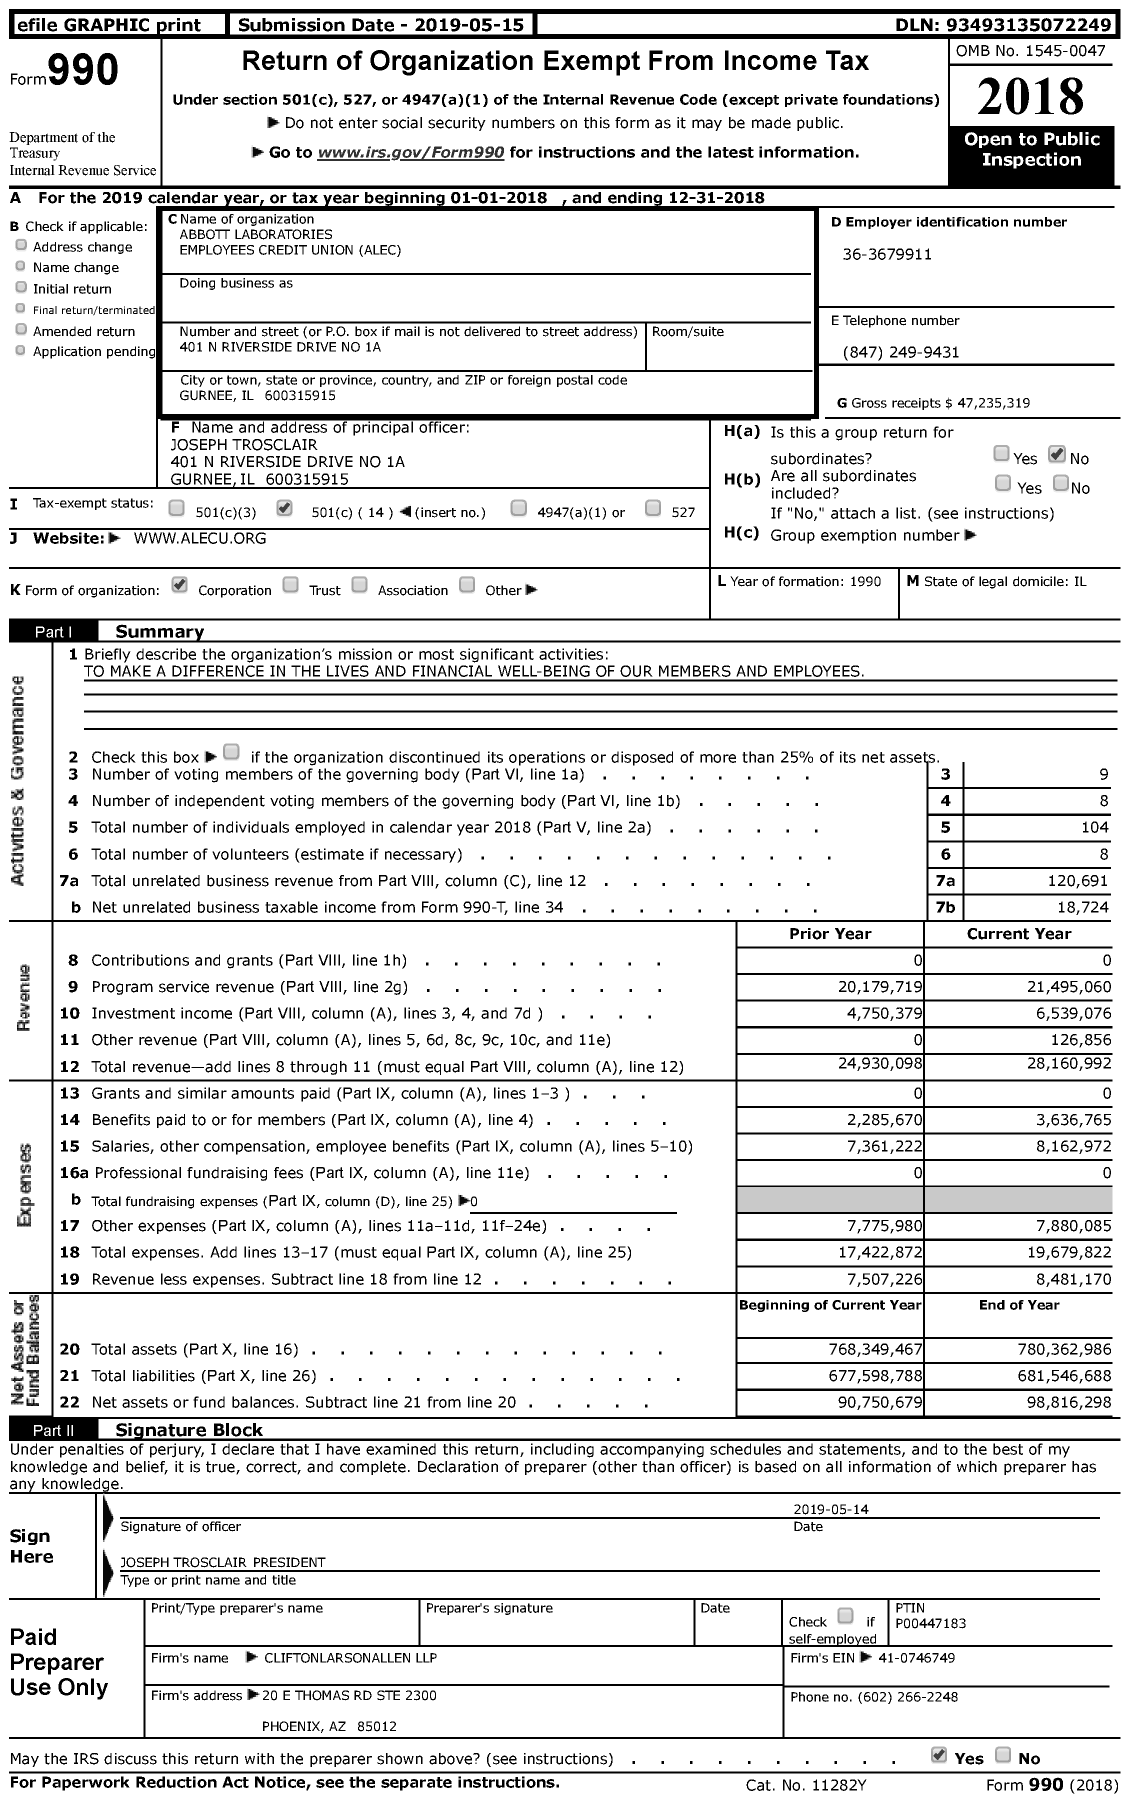 Image of first page of 2018 Form 990 for Abbott Laboratories Employees Credit Union (ALEC)